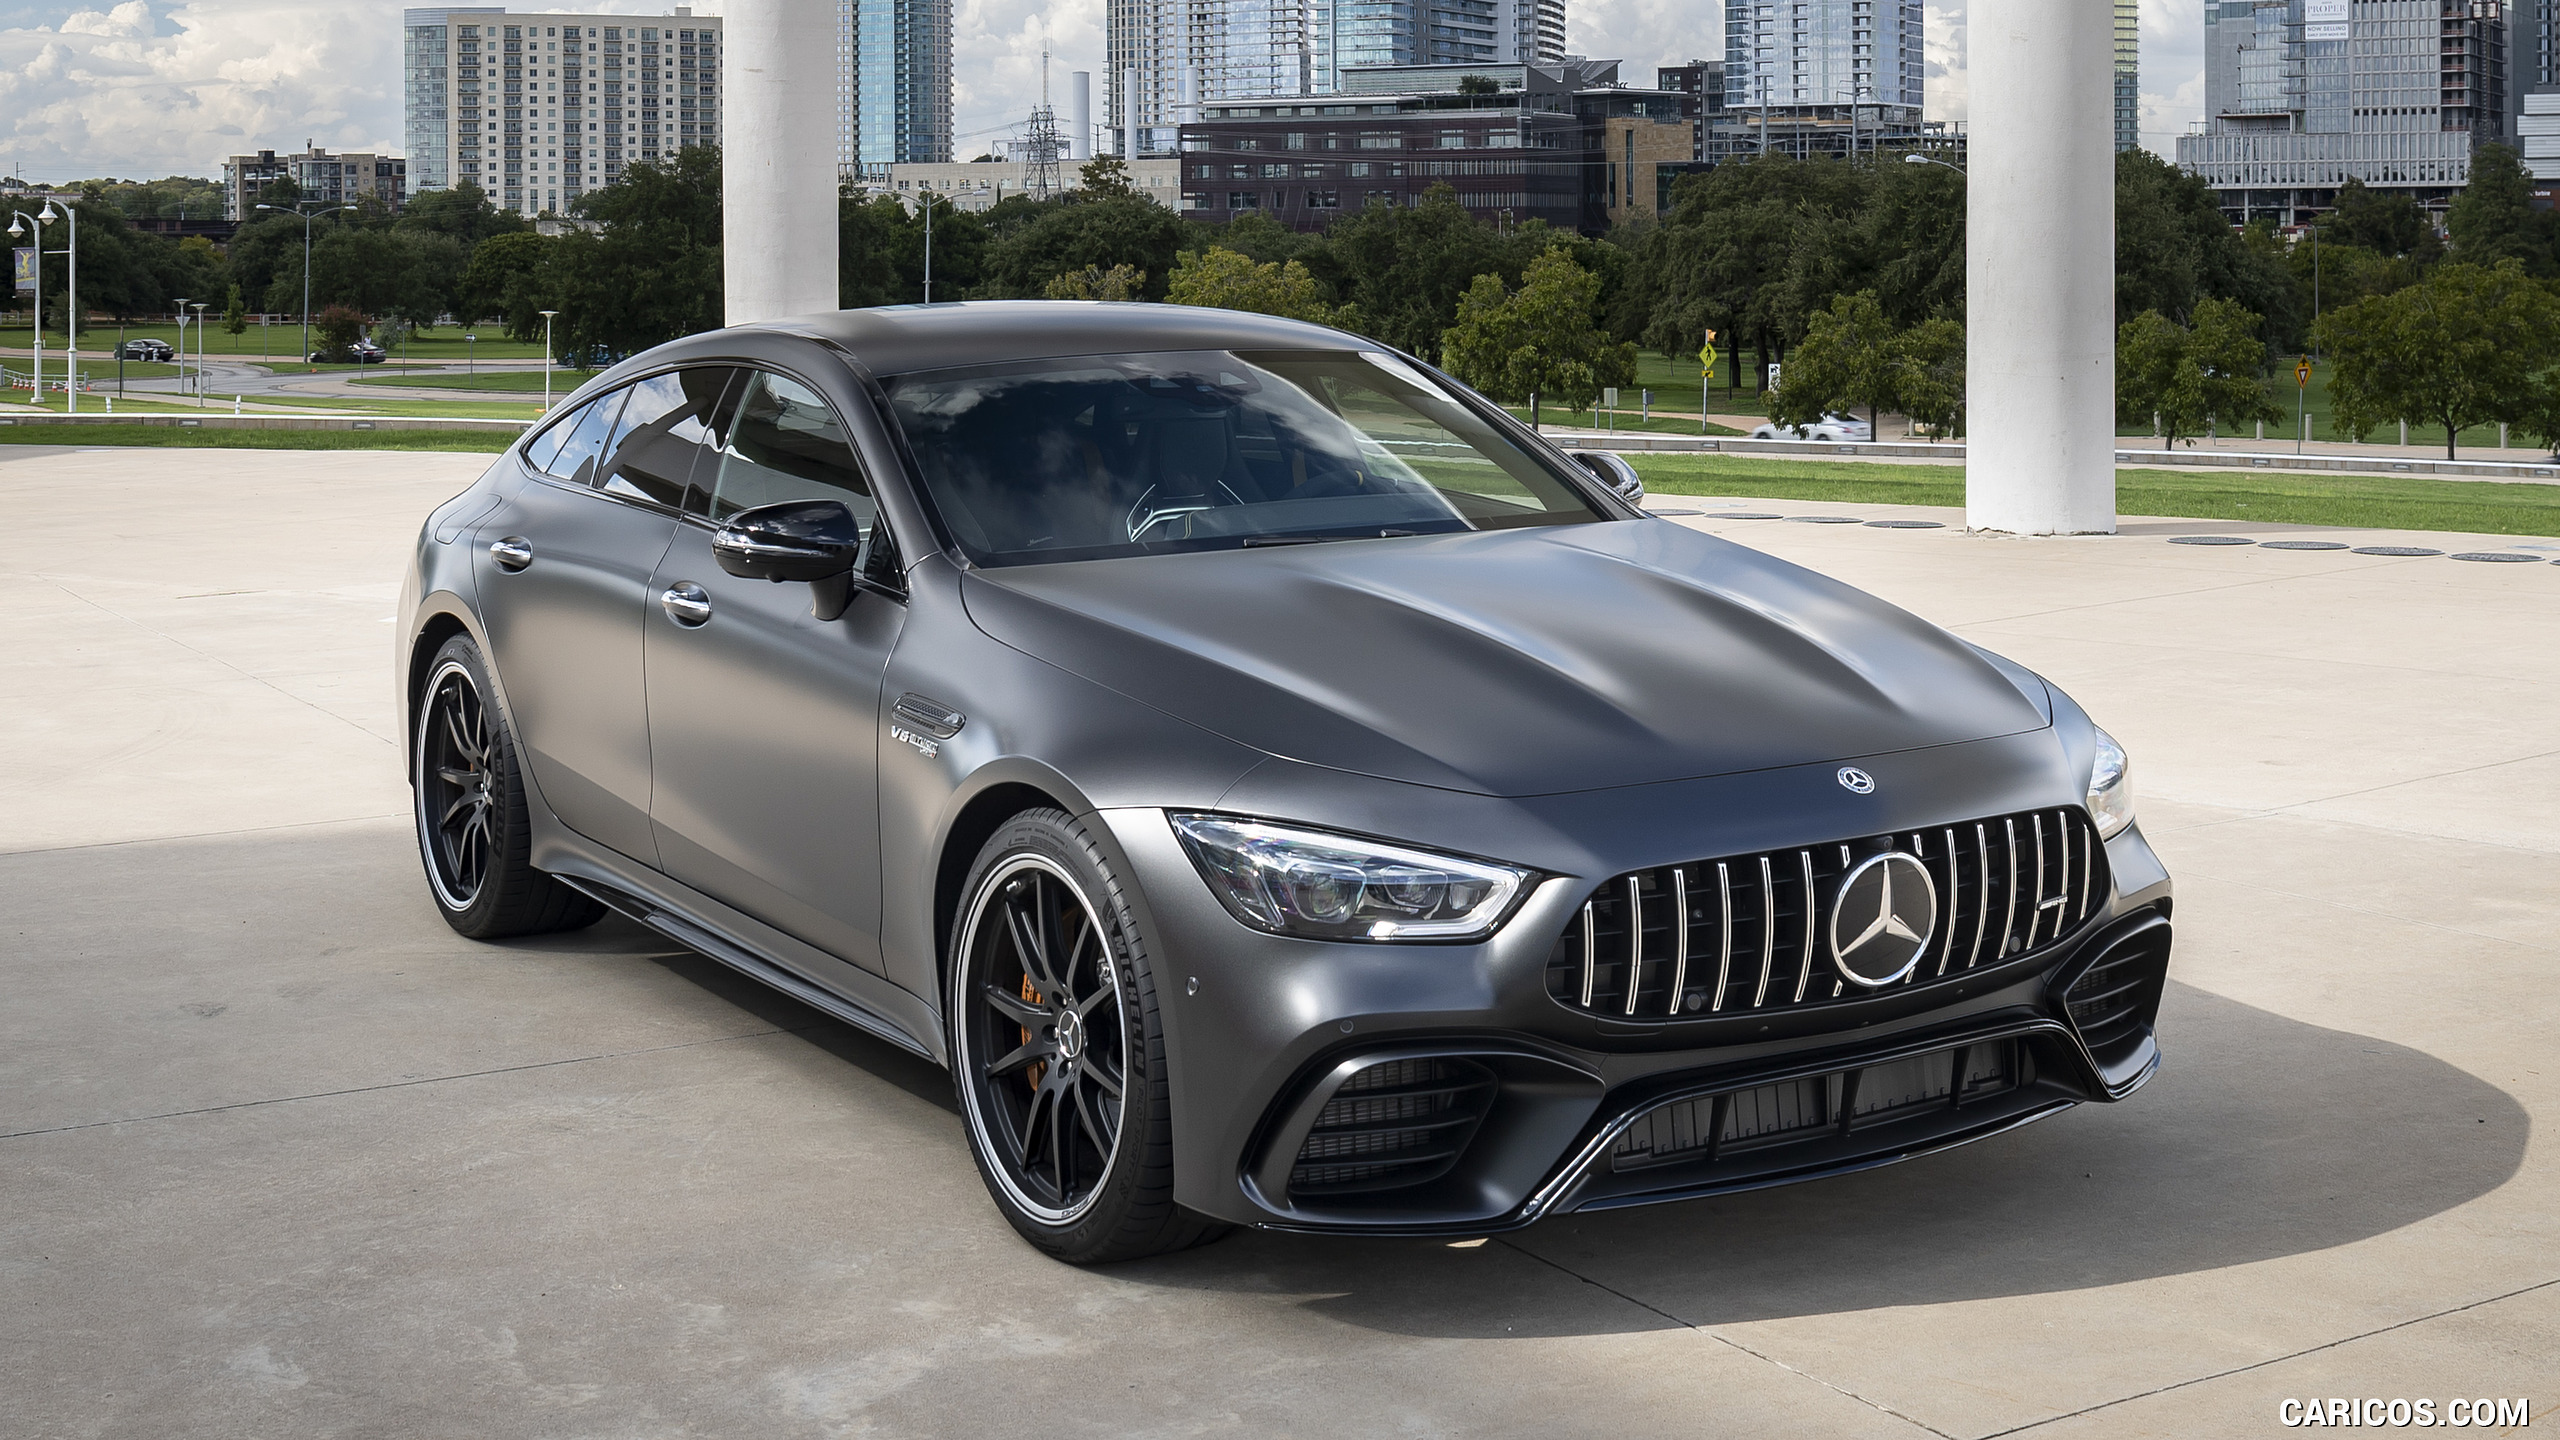 2019 Mercedes-AMG GT 63 S 4MATIC+ 4-Door Coupe - Front Three-Quarter, #214 of 427